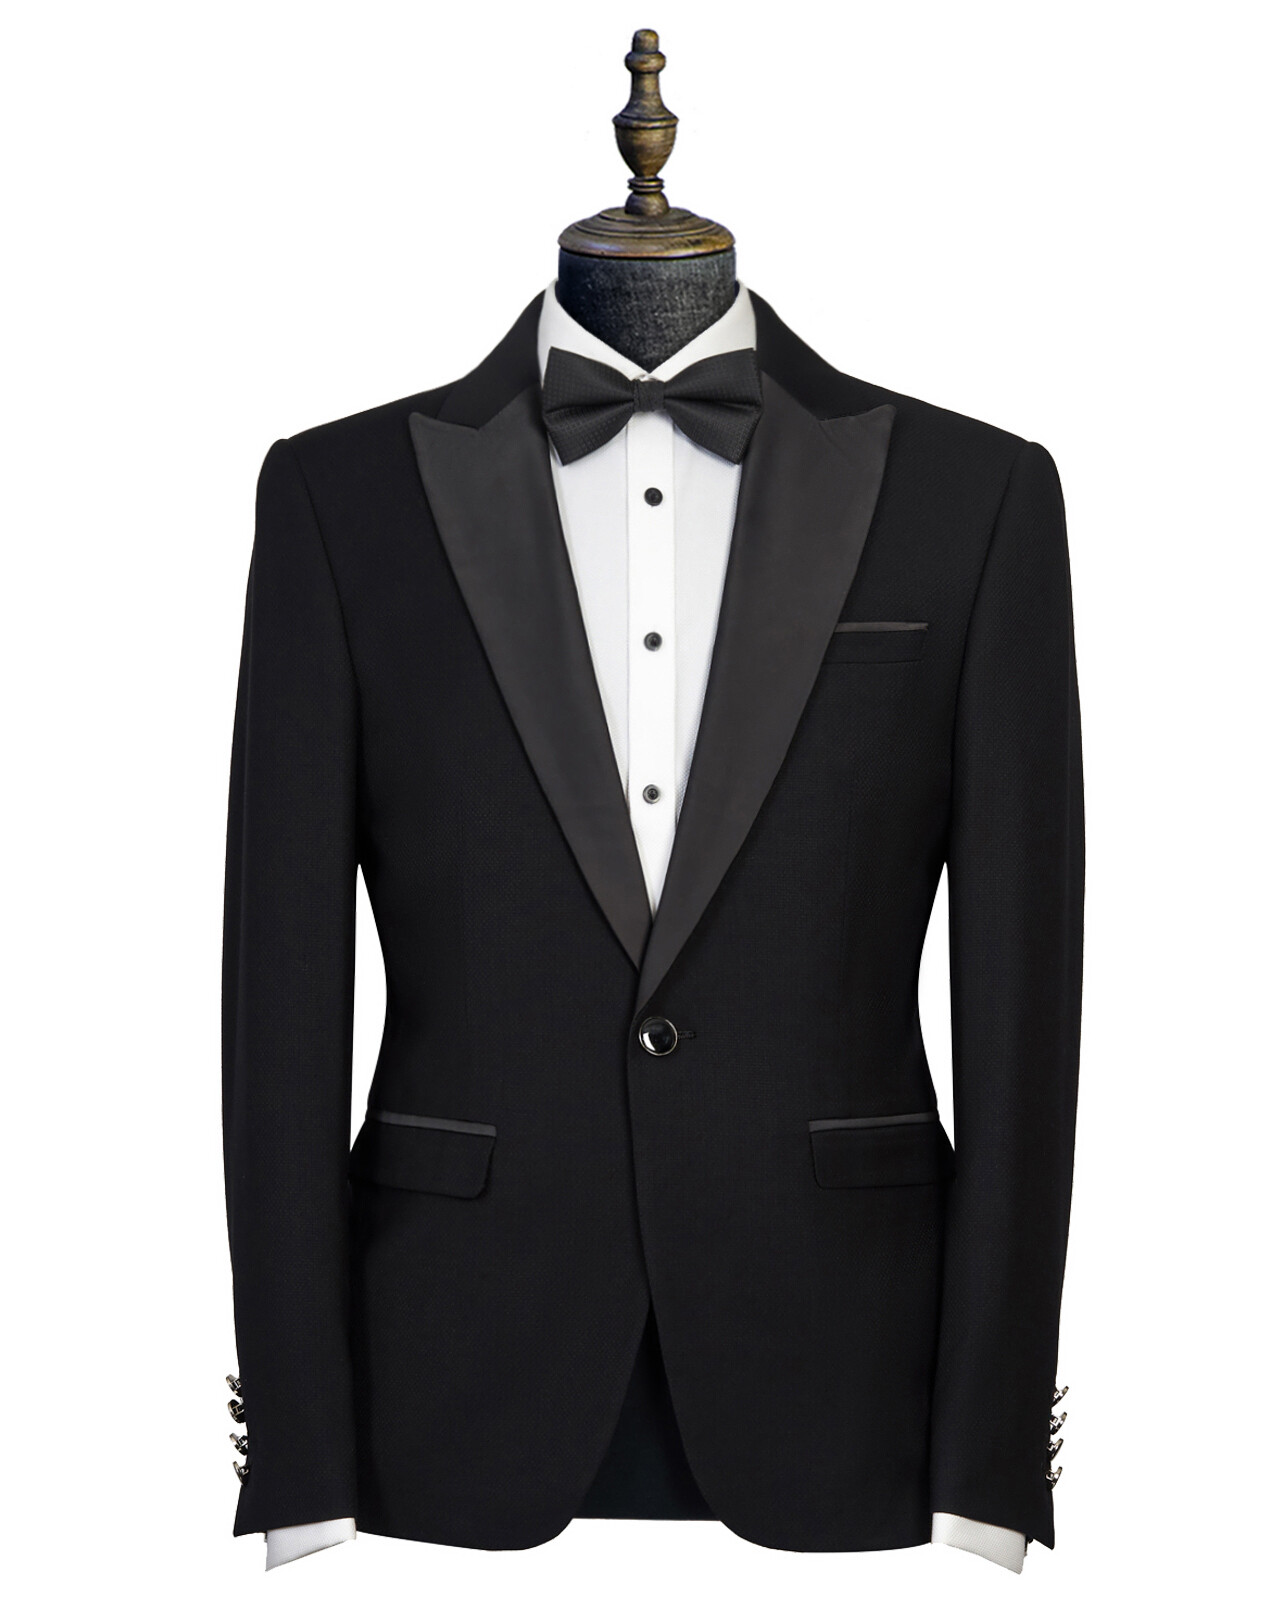 Entry level skinny-fit black tuxedo made from a non-wool fabric